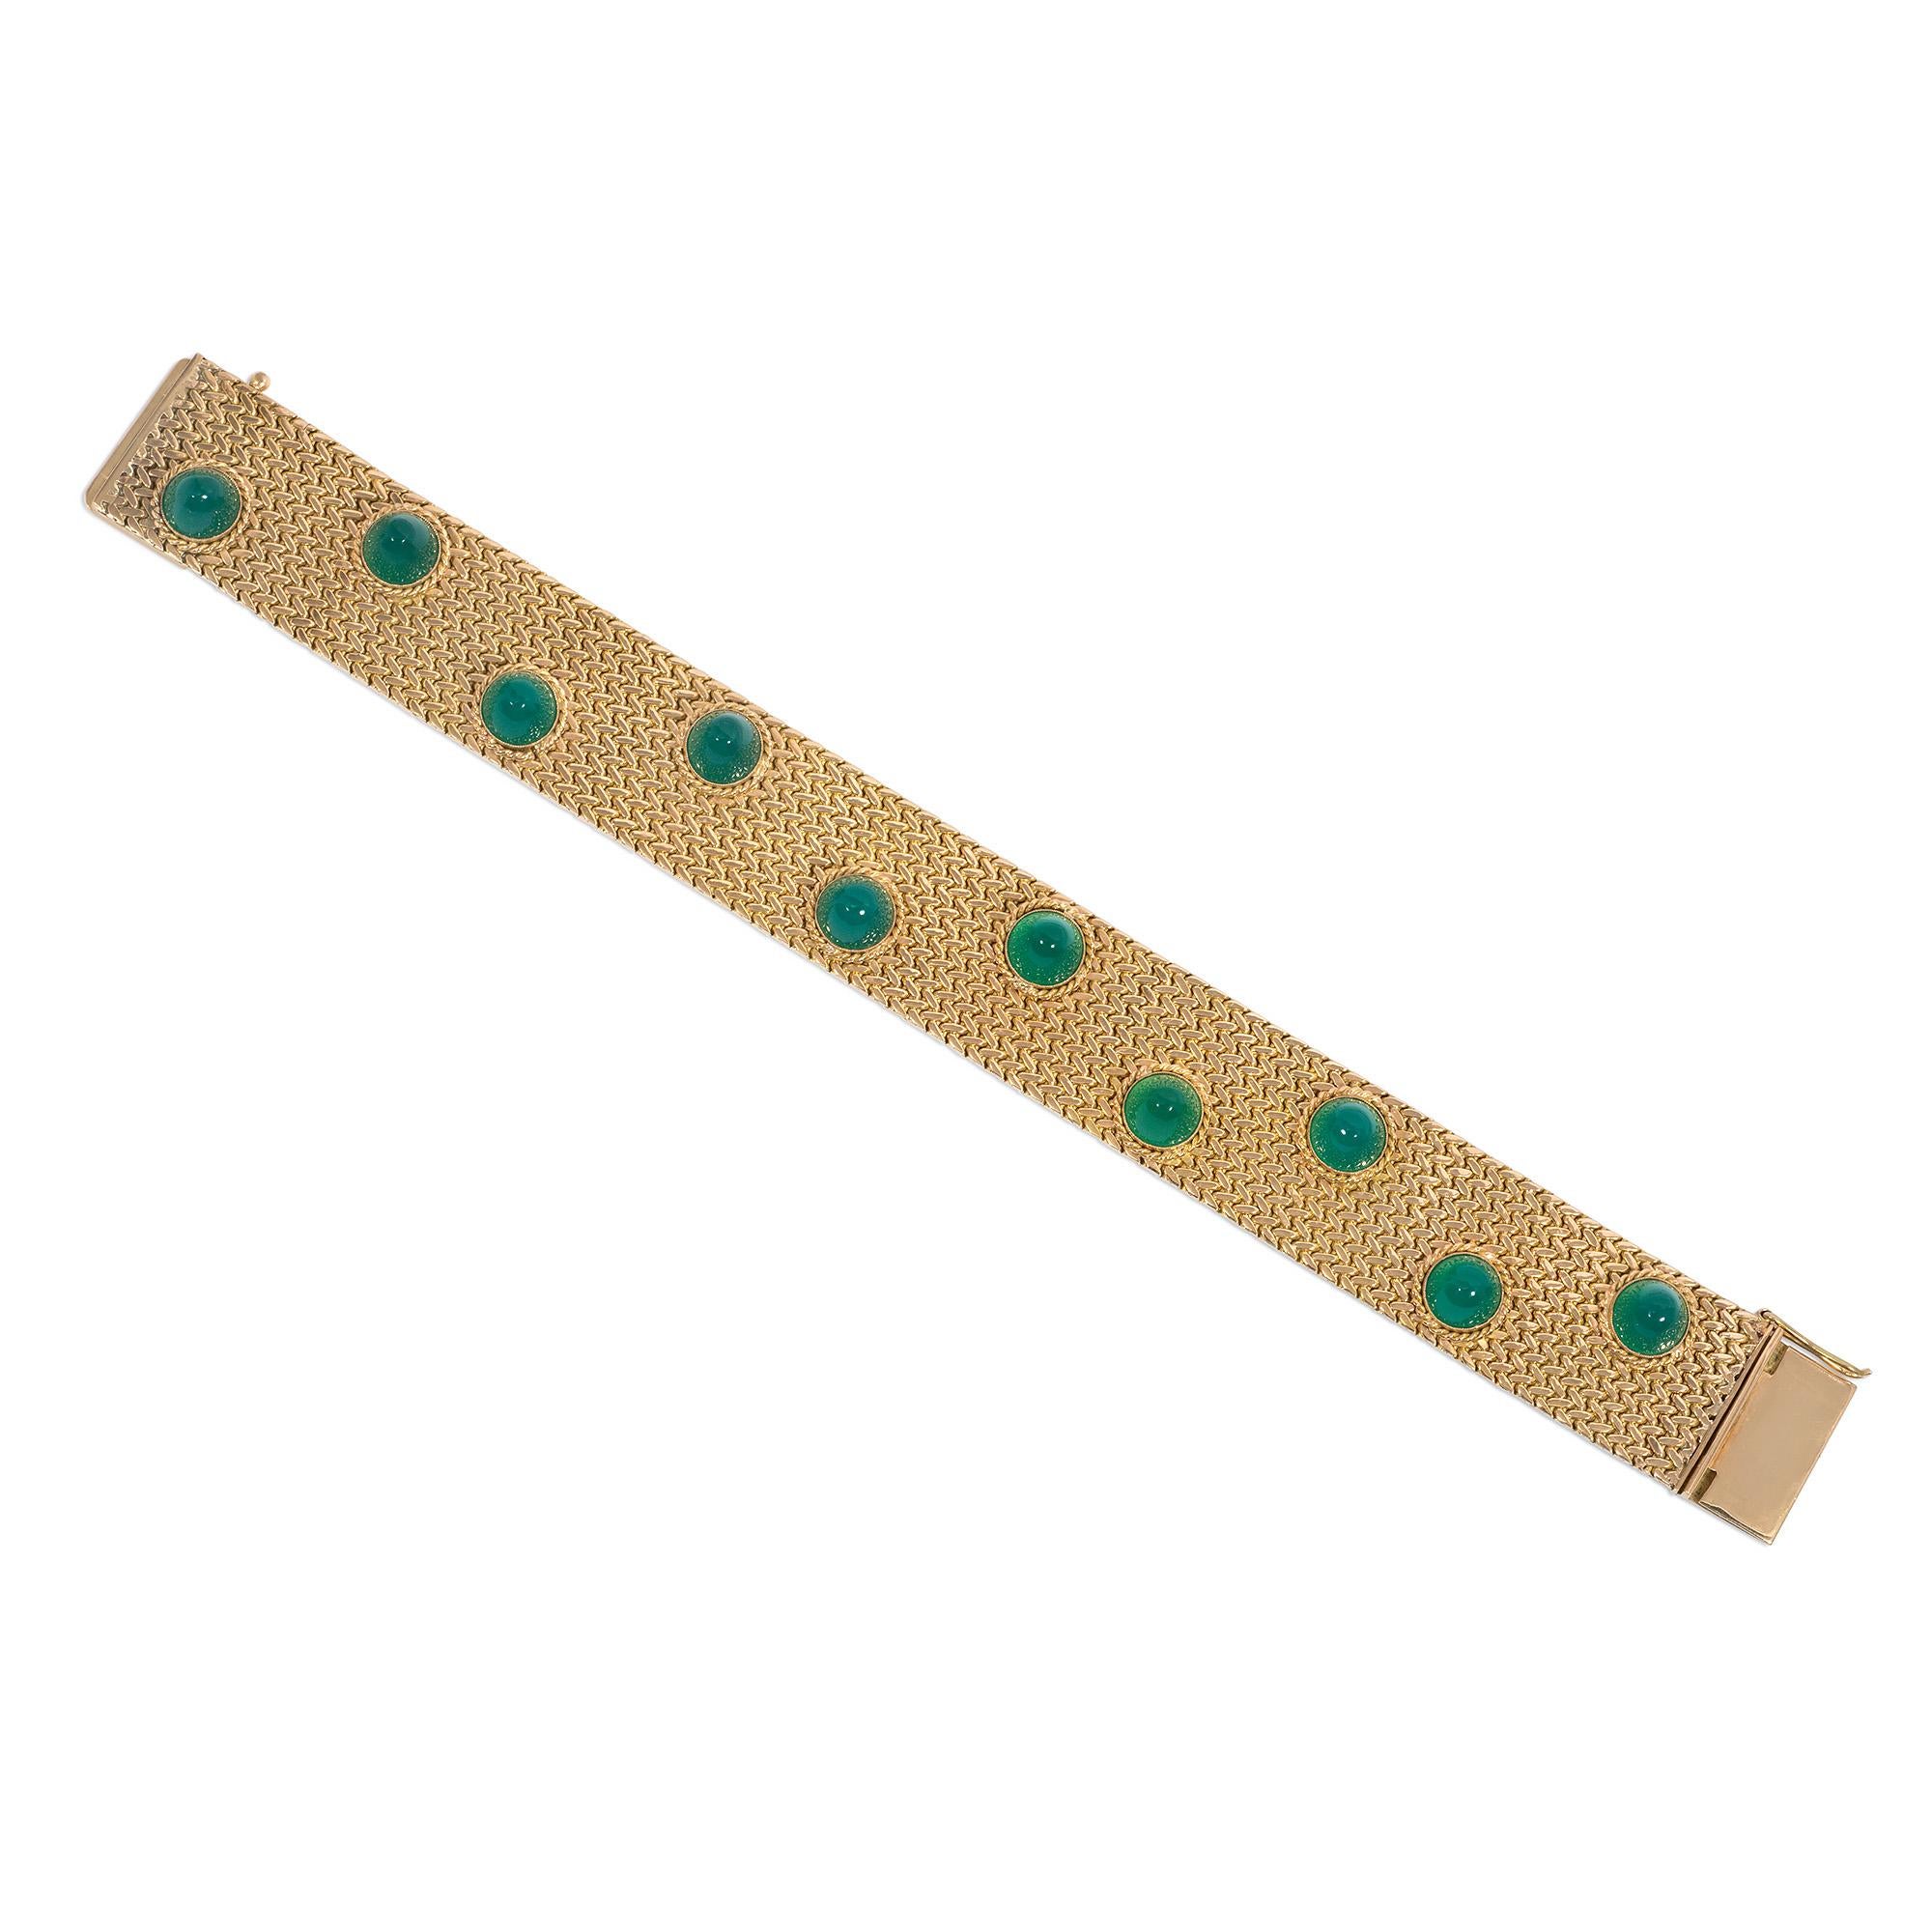 An estate gold and chrysoprase strap bracelet featuring a woven gold herringbone pattern studded with cabochon chrysoprase in ropetwist surrounds, completed by a tongue clasp with figure-8 safety mechanism, in 18k.

* Includes Kentshire's letter of